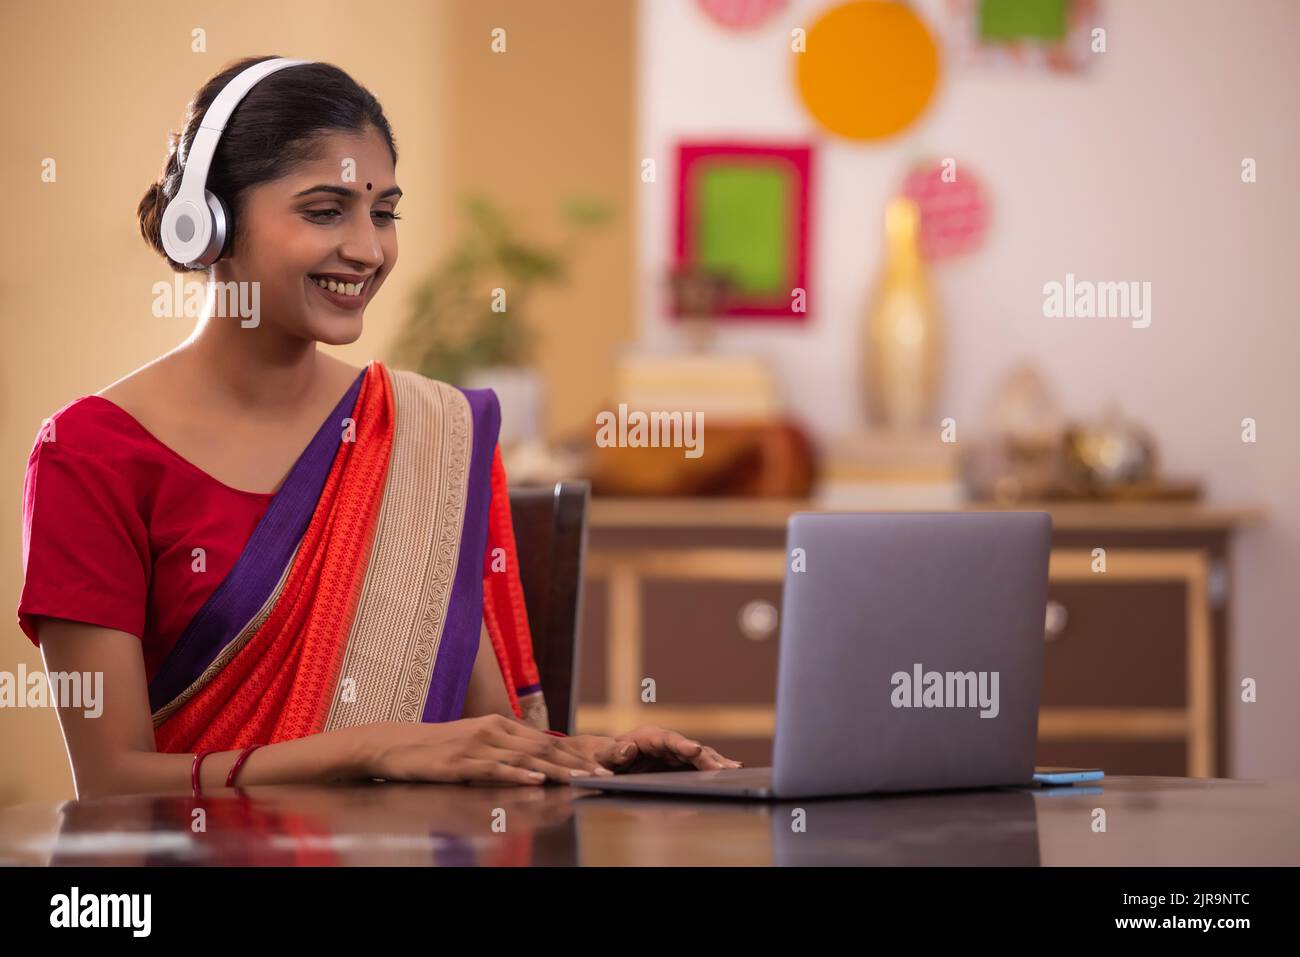 Smiling woman working on laptop at home Stock Photo